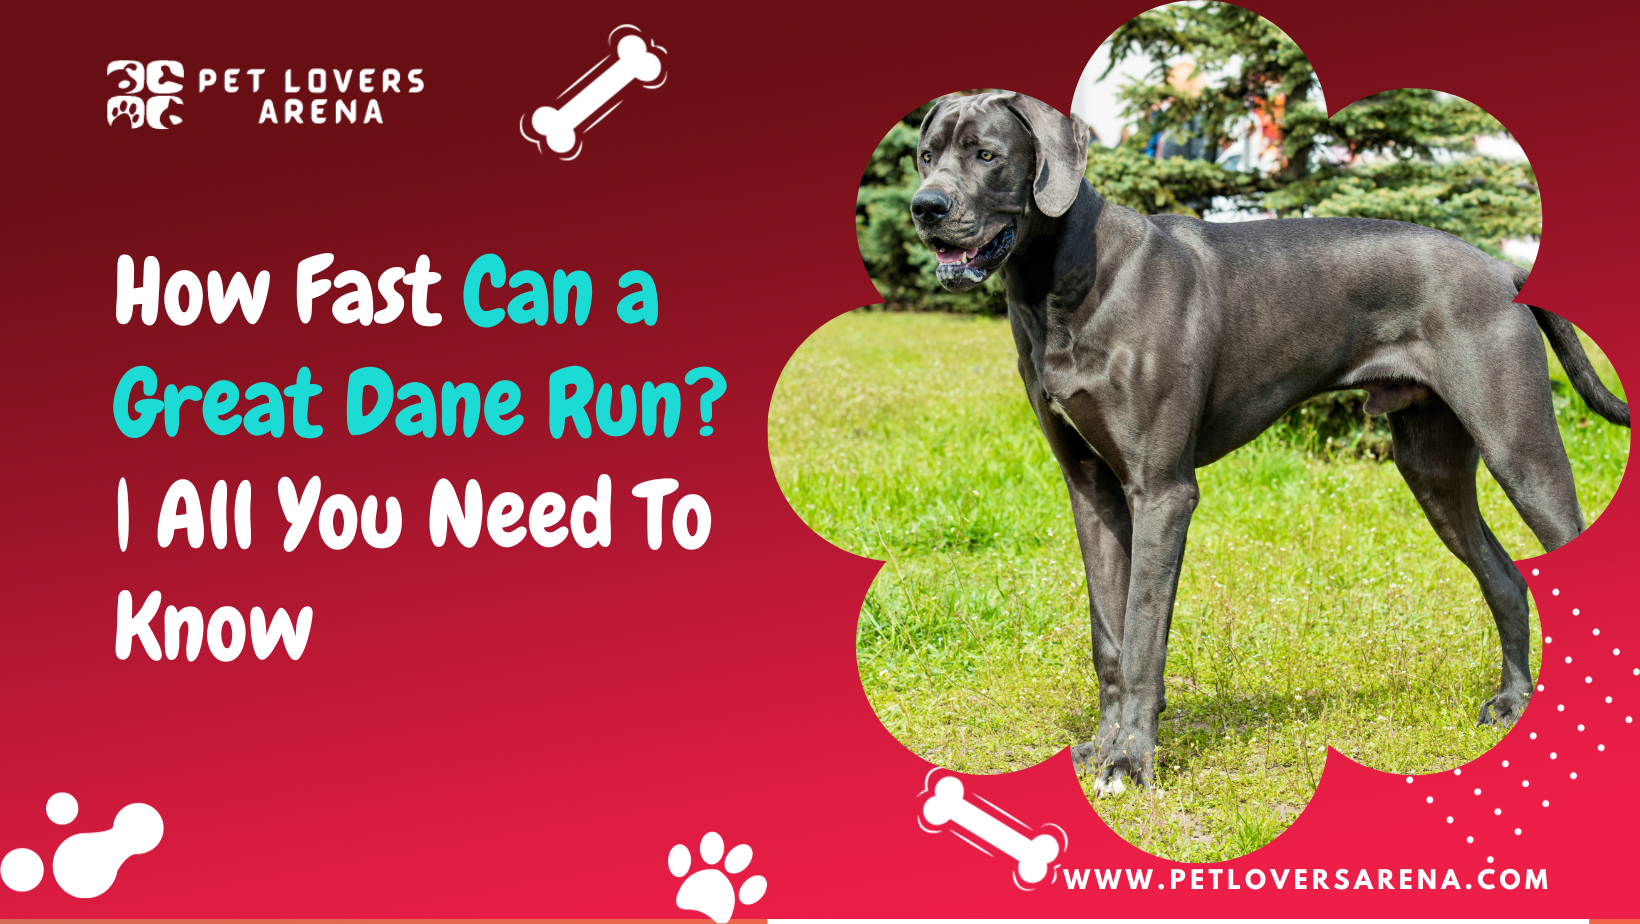 How Fast Can a Great Dane Run?